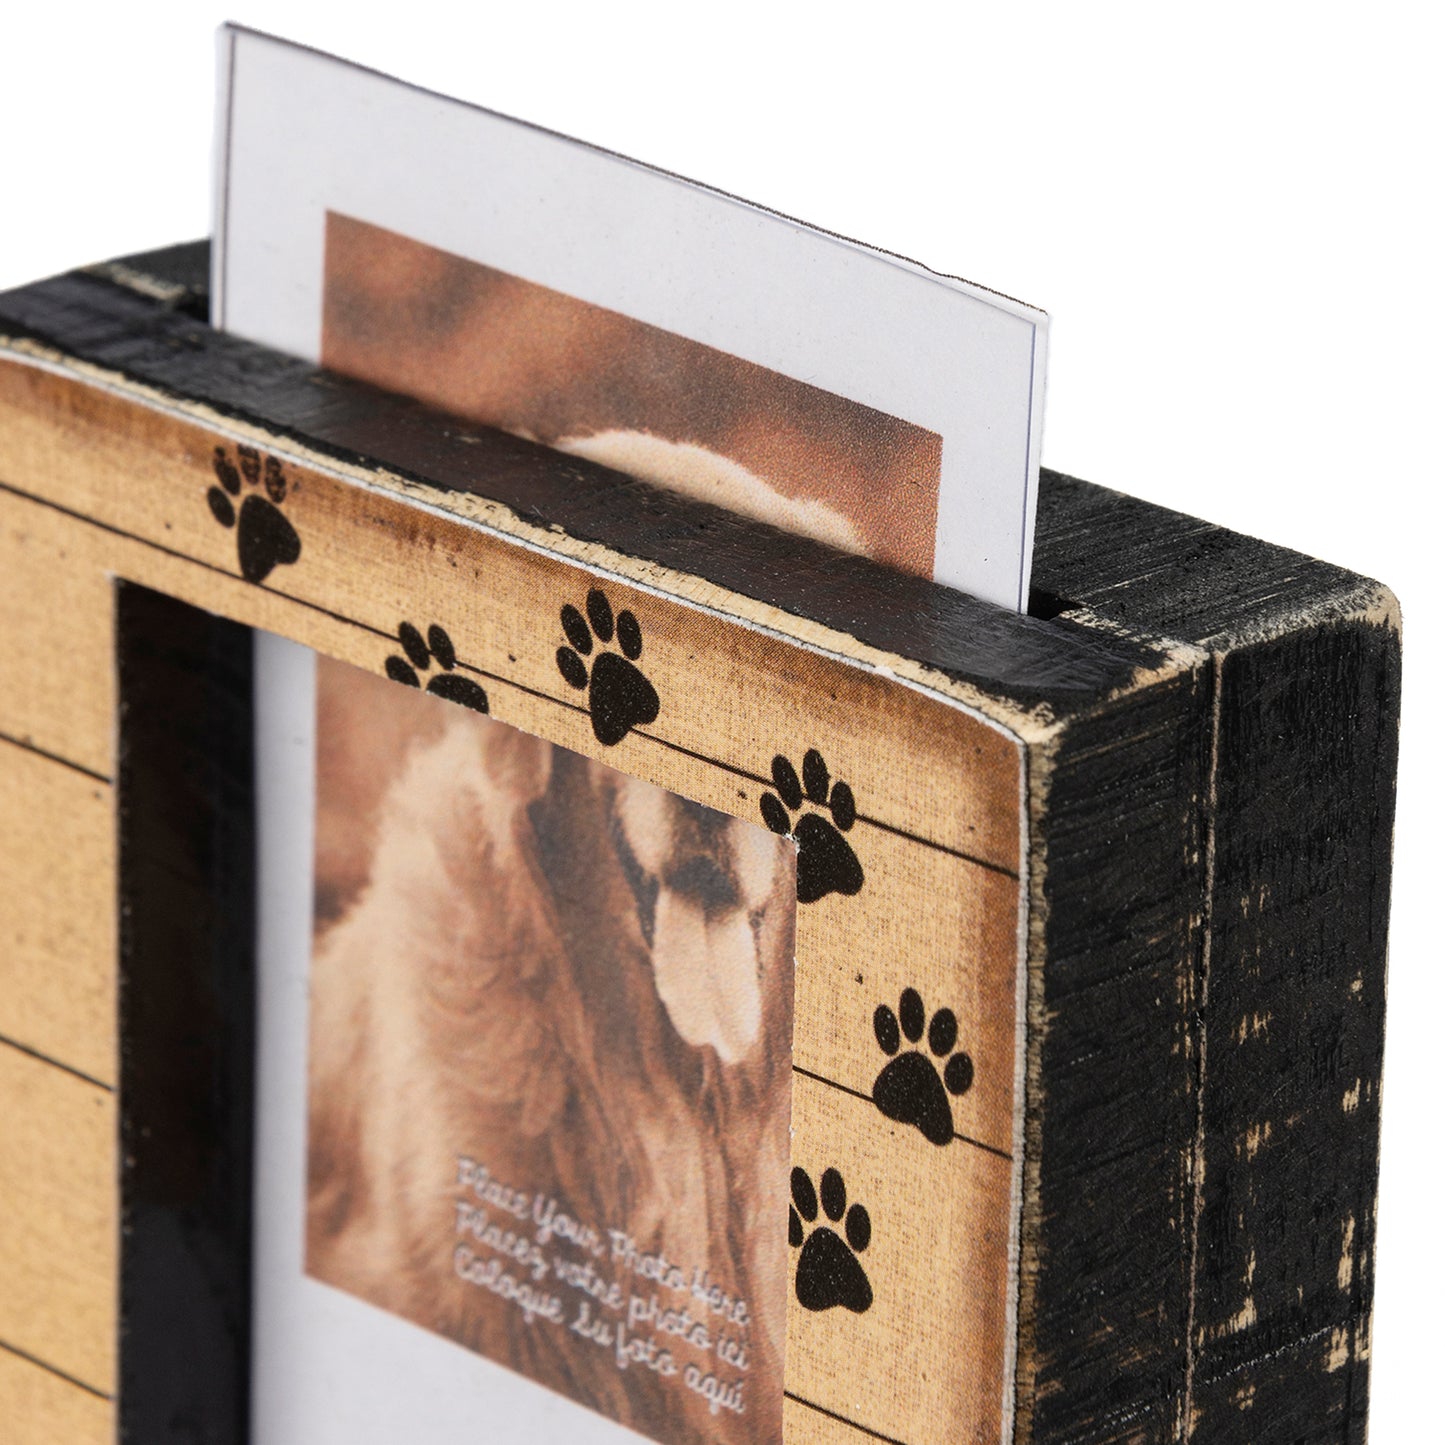 Pet Box Frame - 3.25" x 4" x 1" - You Would Have Lived Forever